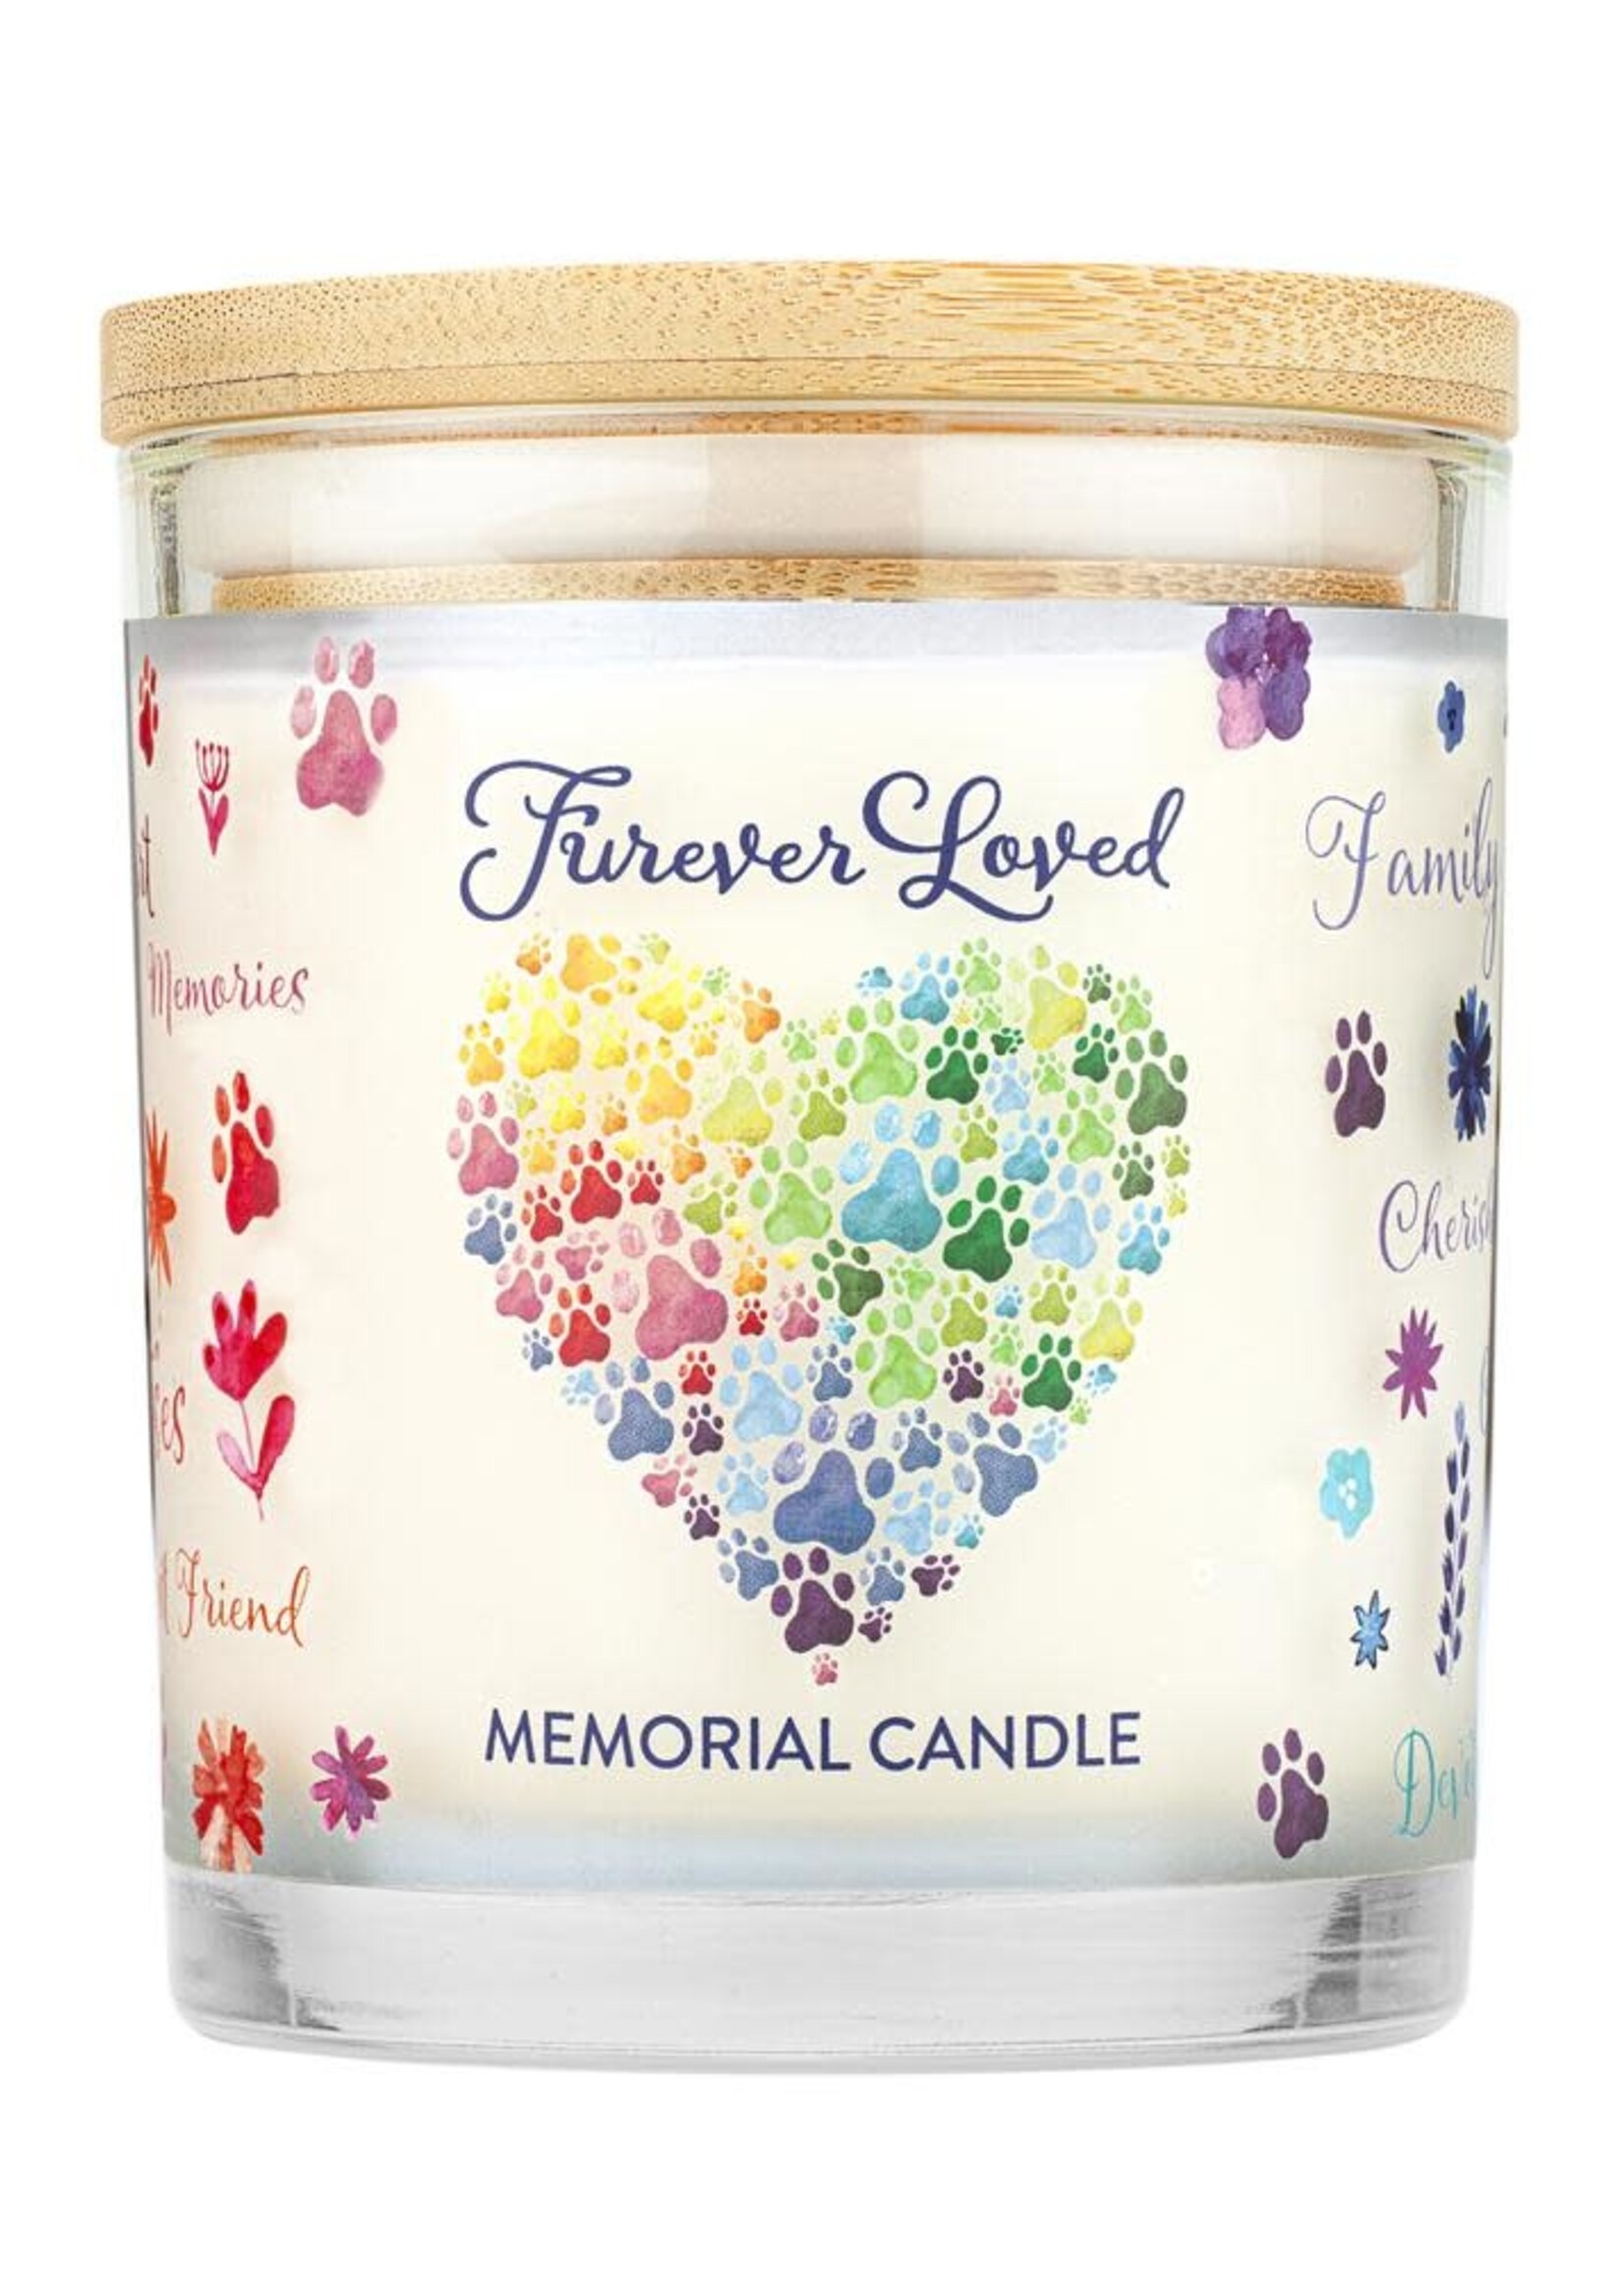 Pet House by One Fur All Furever Loved Memorial Candle